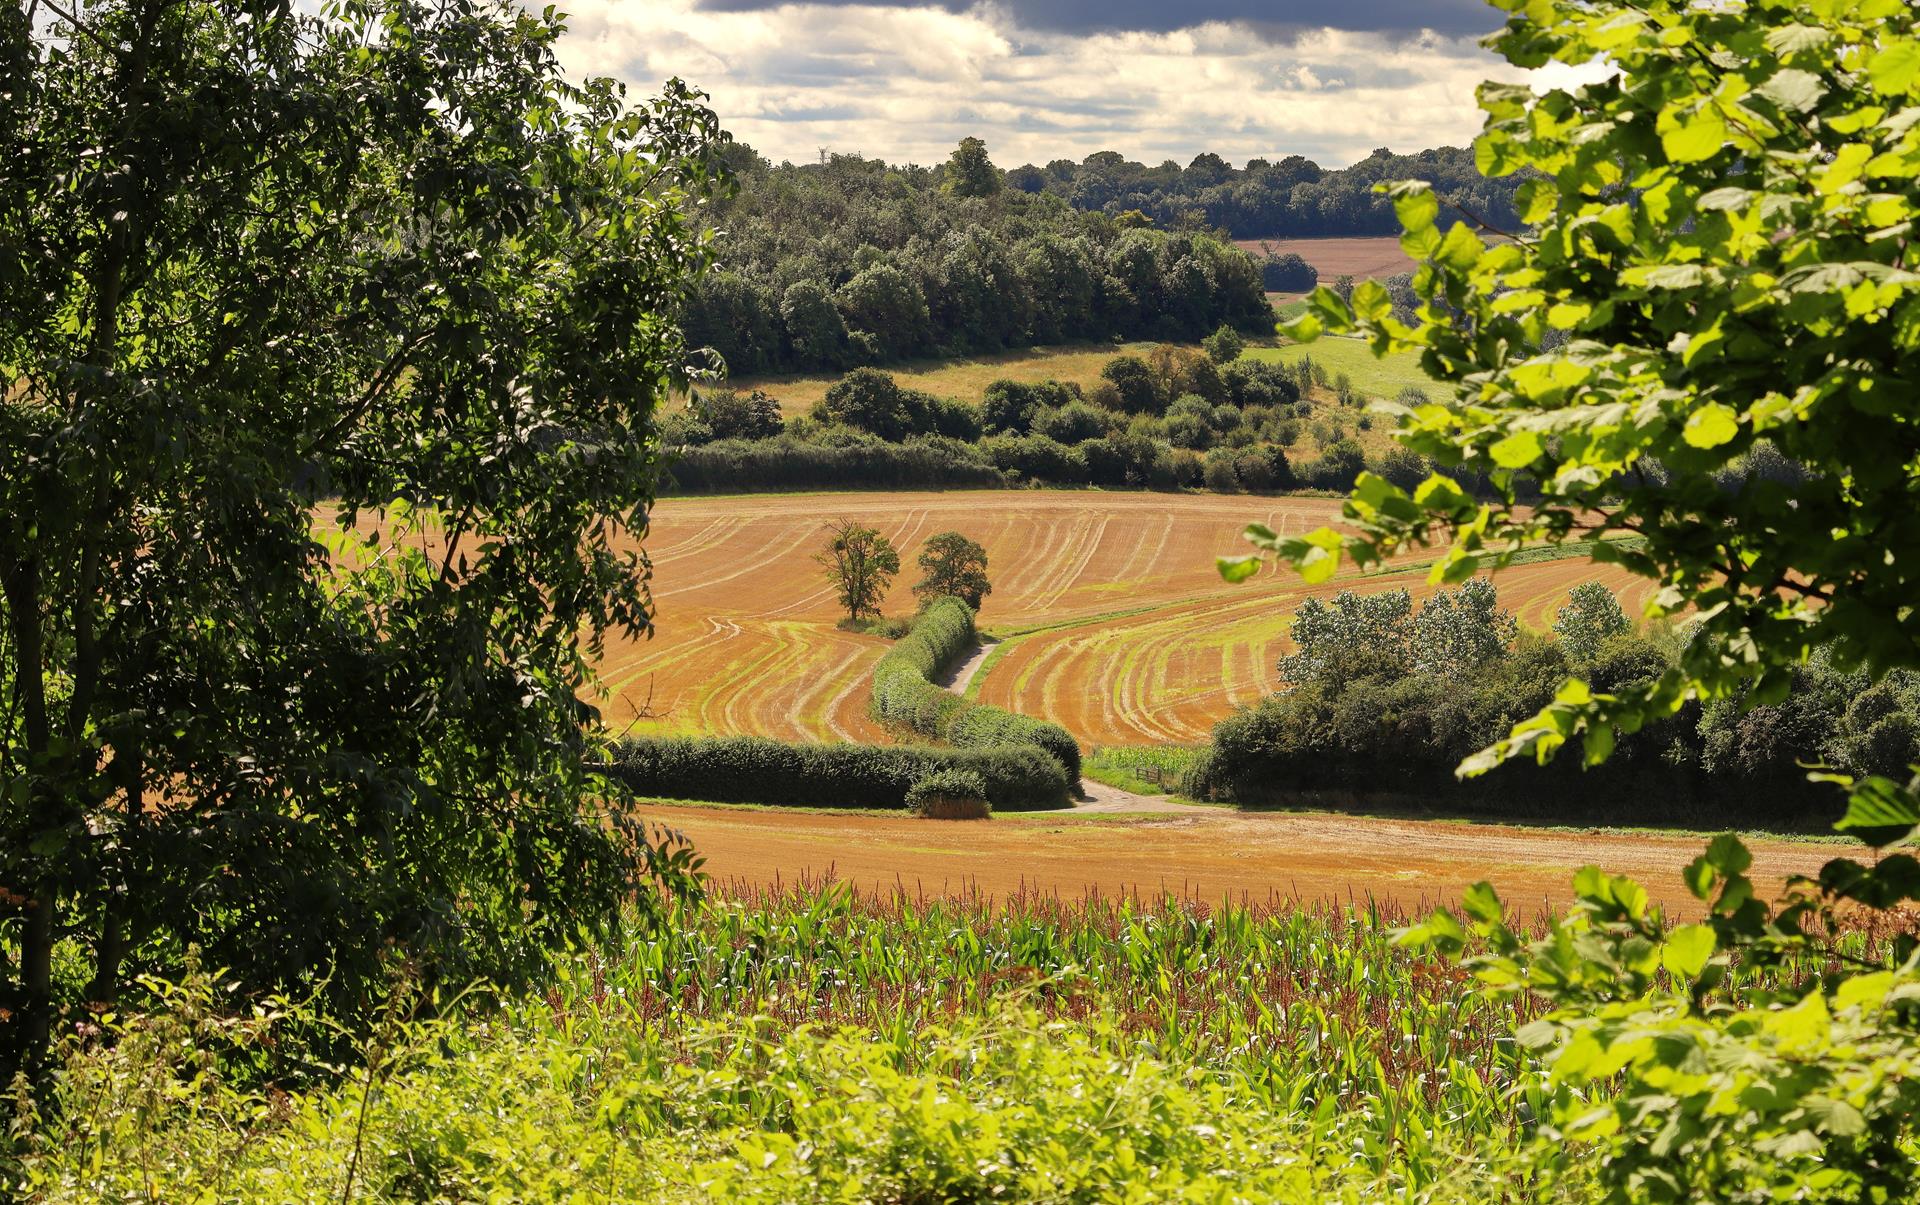 Environmental Land Management and Countryside Stewardship updates - what does this mean for your farming business?